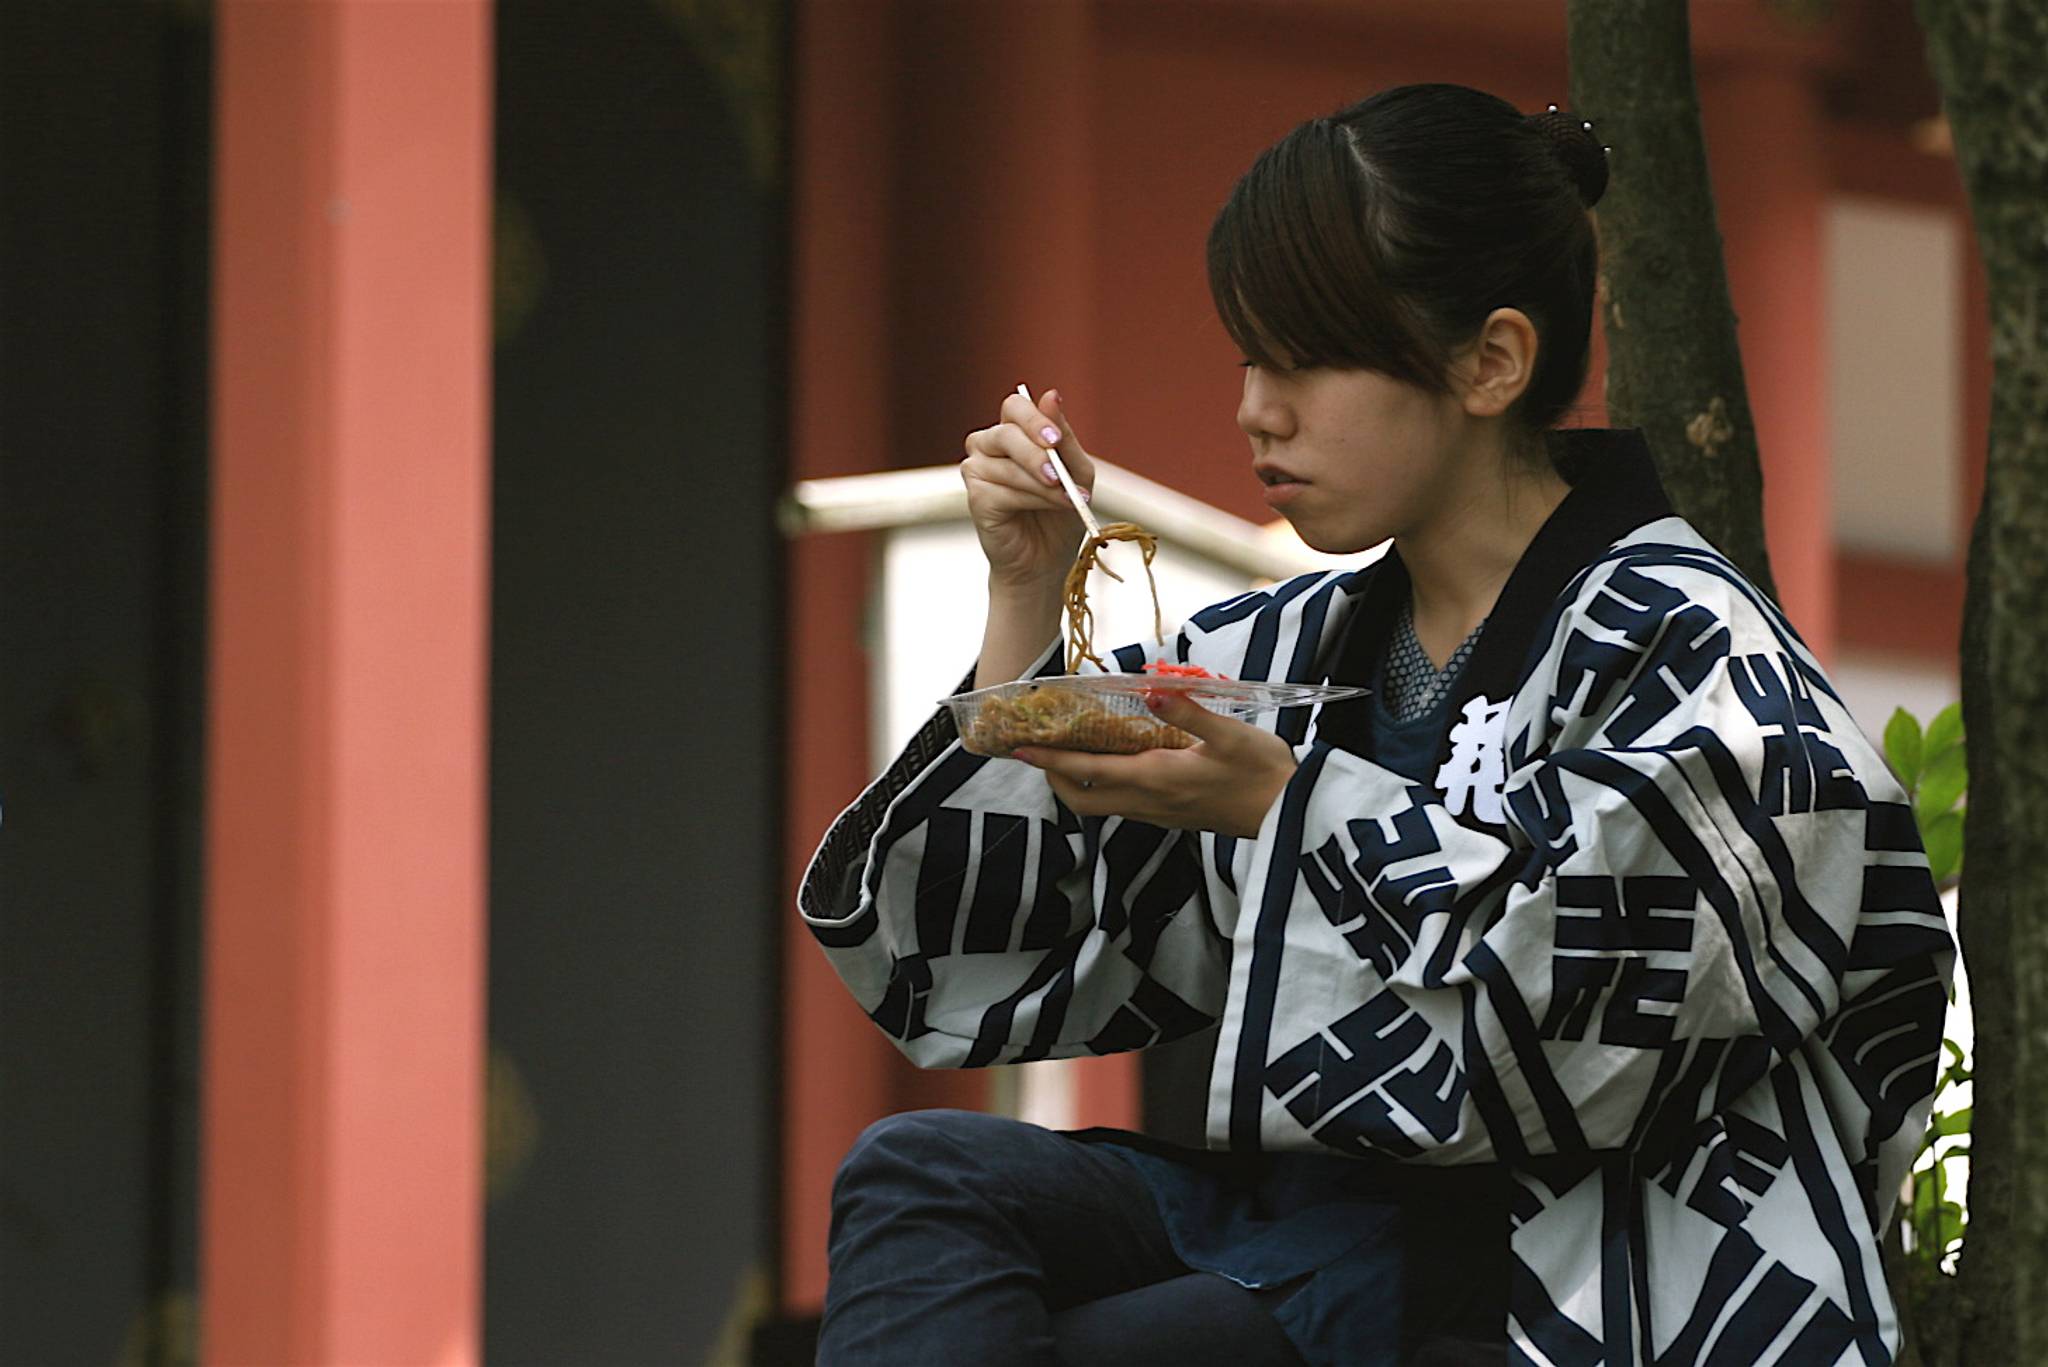 Depachikas: busy Japanese women reach for the ready meals